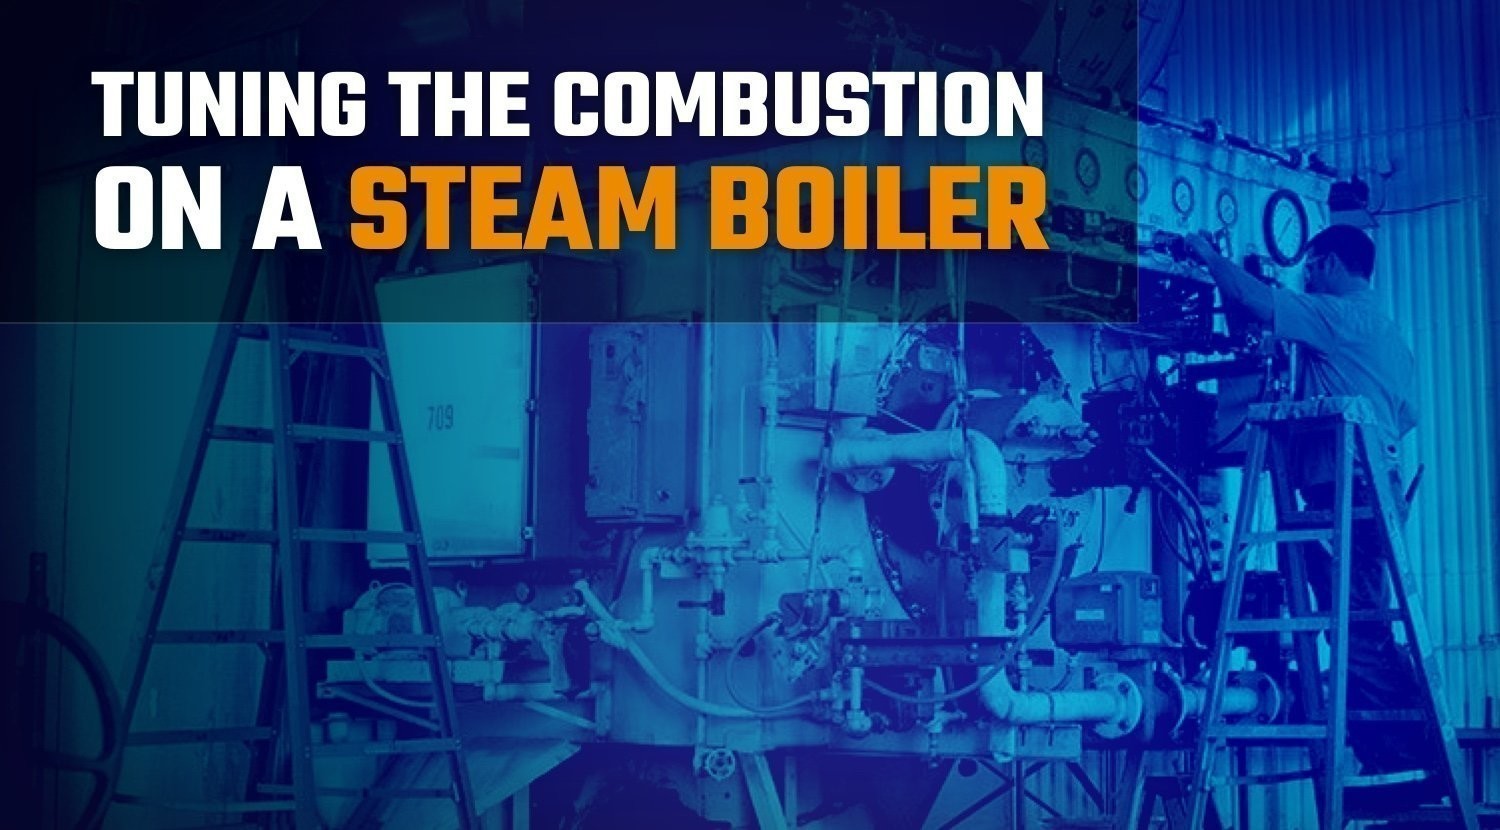 Tuning the Combustion on a Steam Boiler